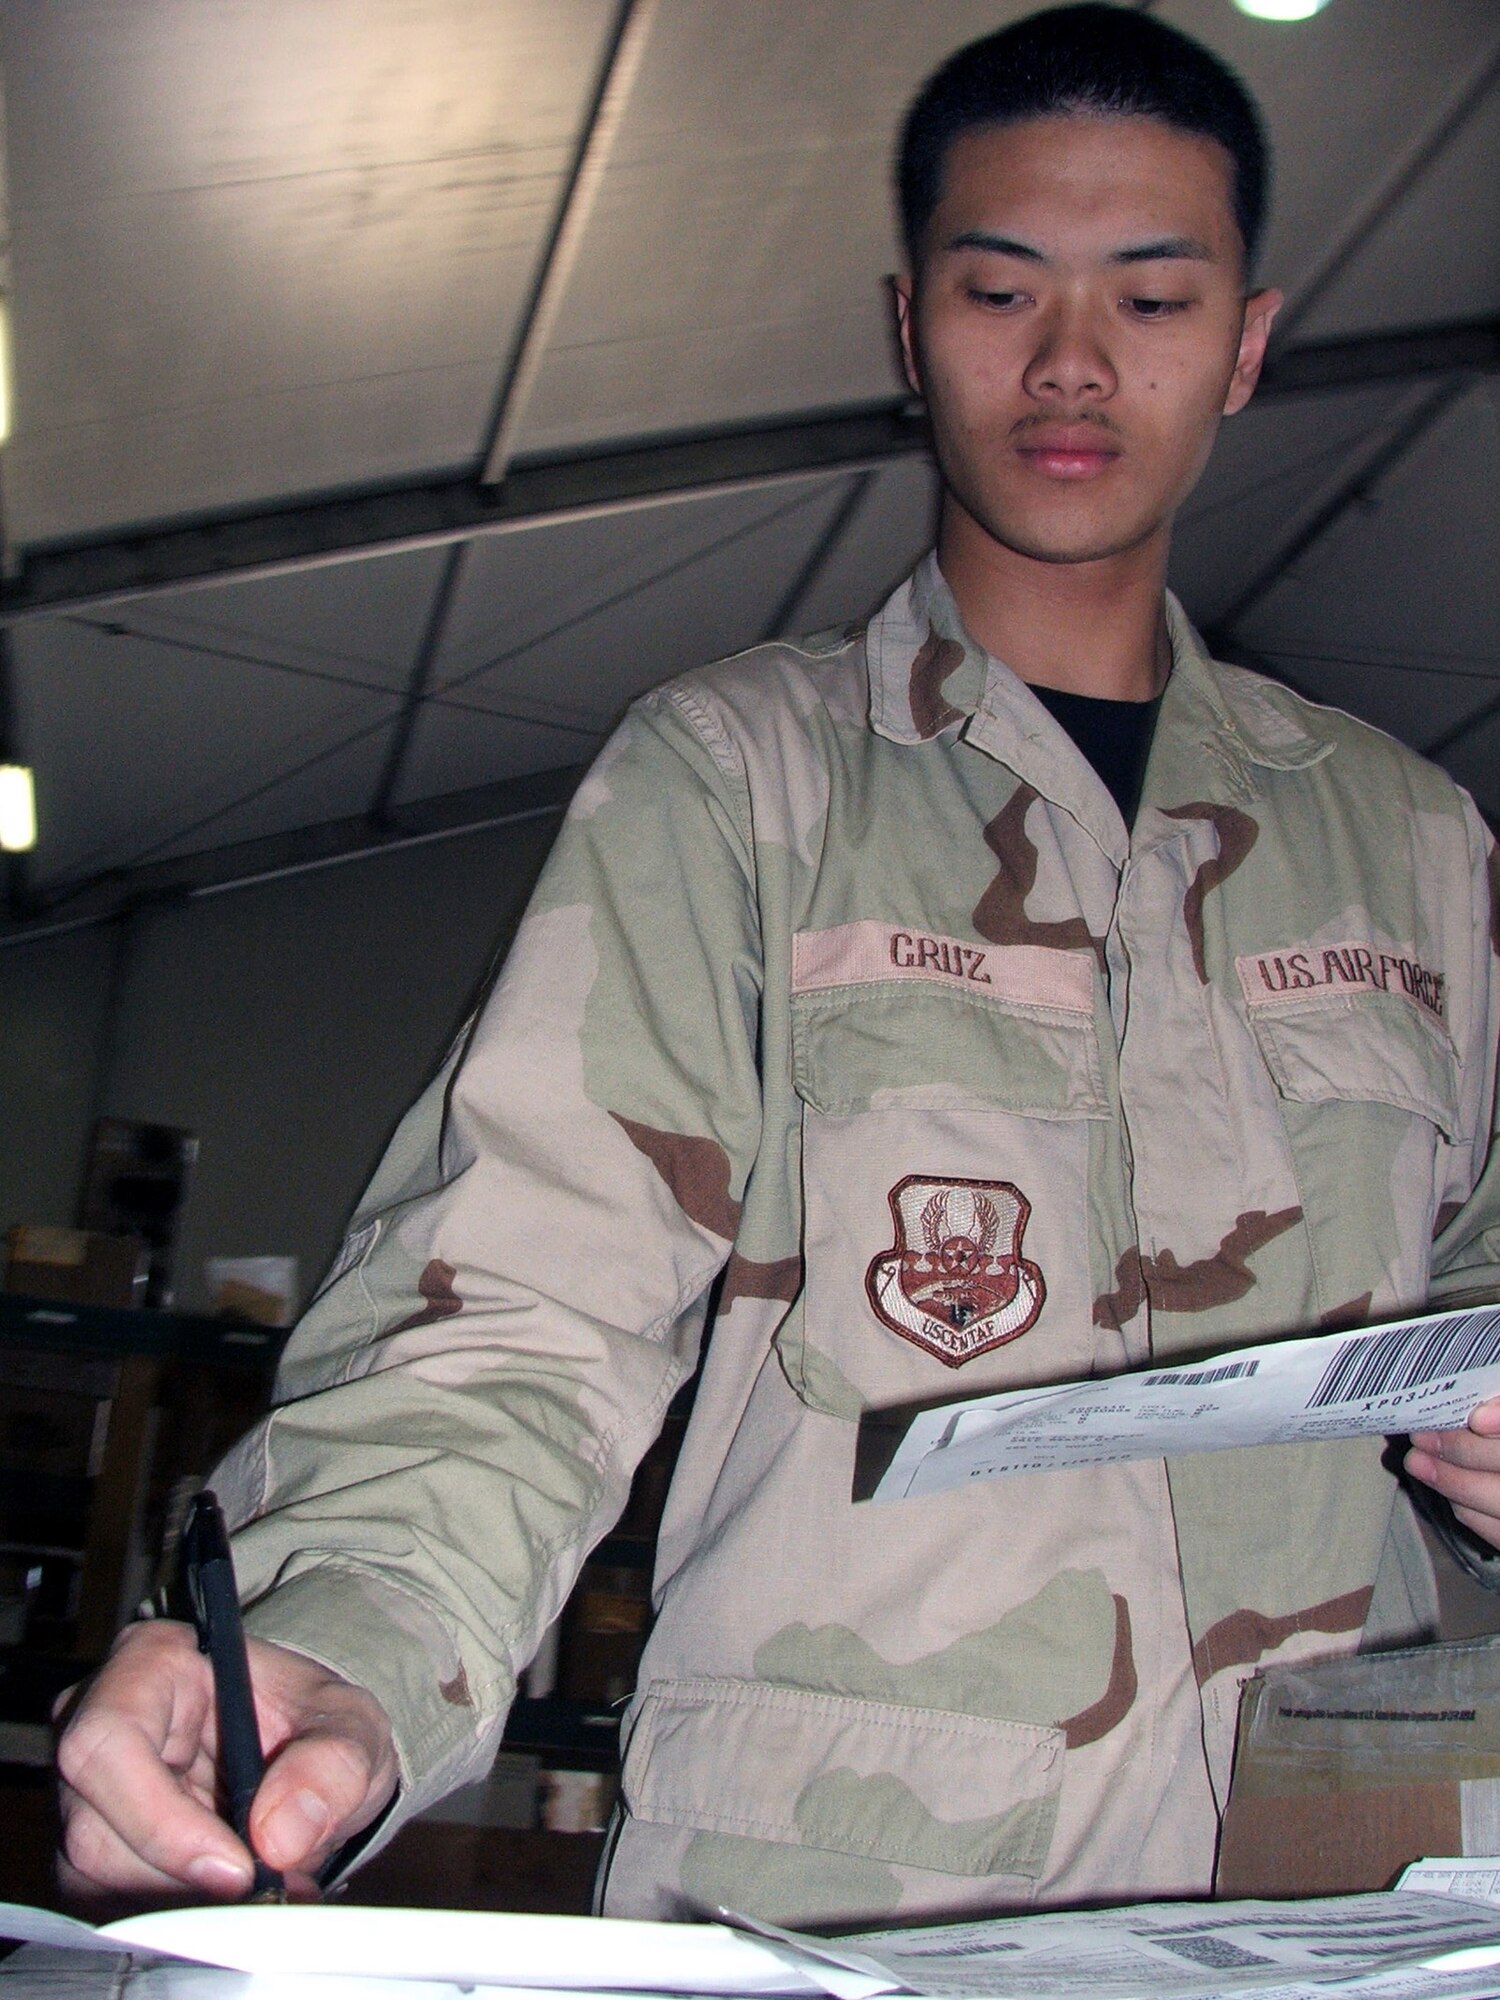 KARSHI-KHANABAD AIR BASE, Uzbekistan -- Senior Airman Aaron Cruz checks in cargo in the supply warehouse here April 26.  He is assigned to the 416th Expeditionary Mission Support Squadron's supply section and is deployed from Grand Forks Air Force Base, N.D.  (U.S. Air Force photo by Tech. Sgt. Scott T. Sturkol)